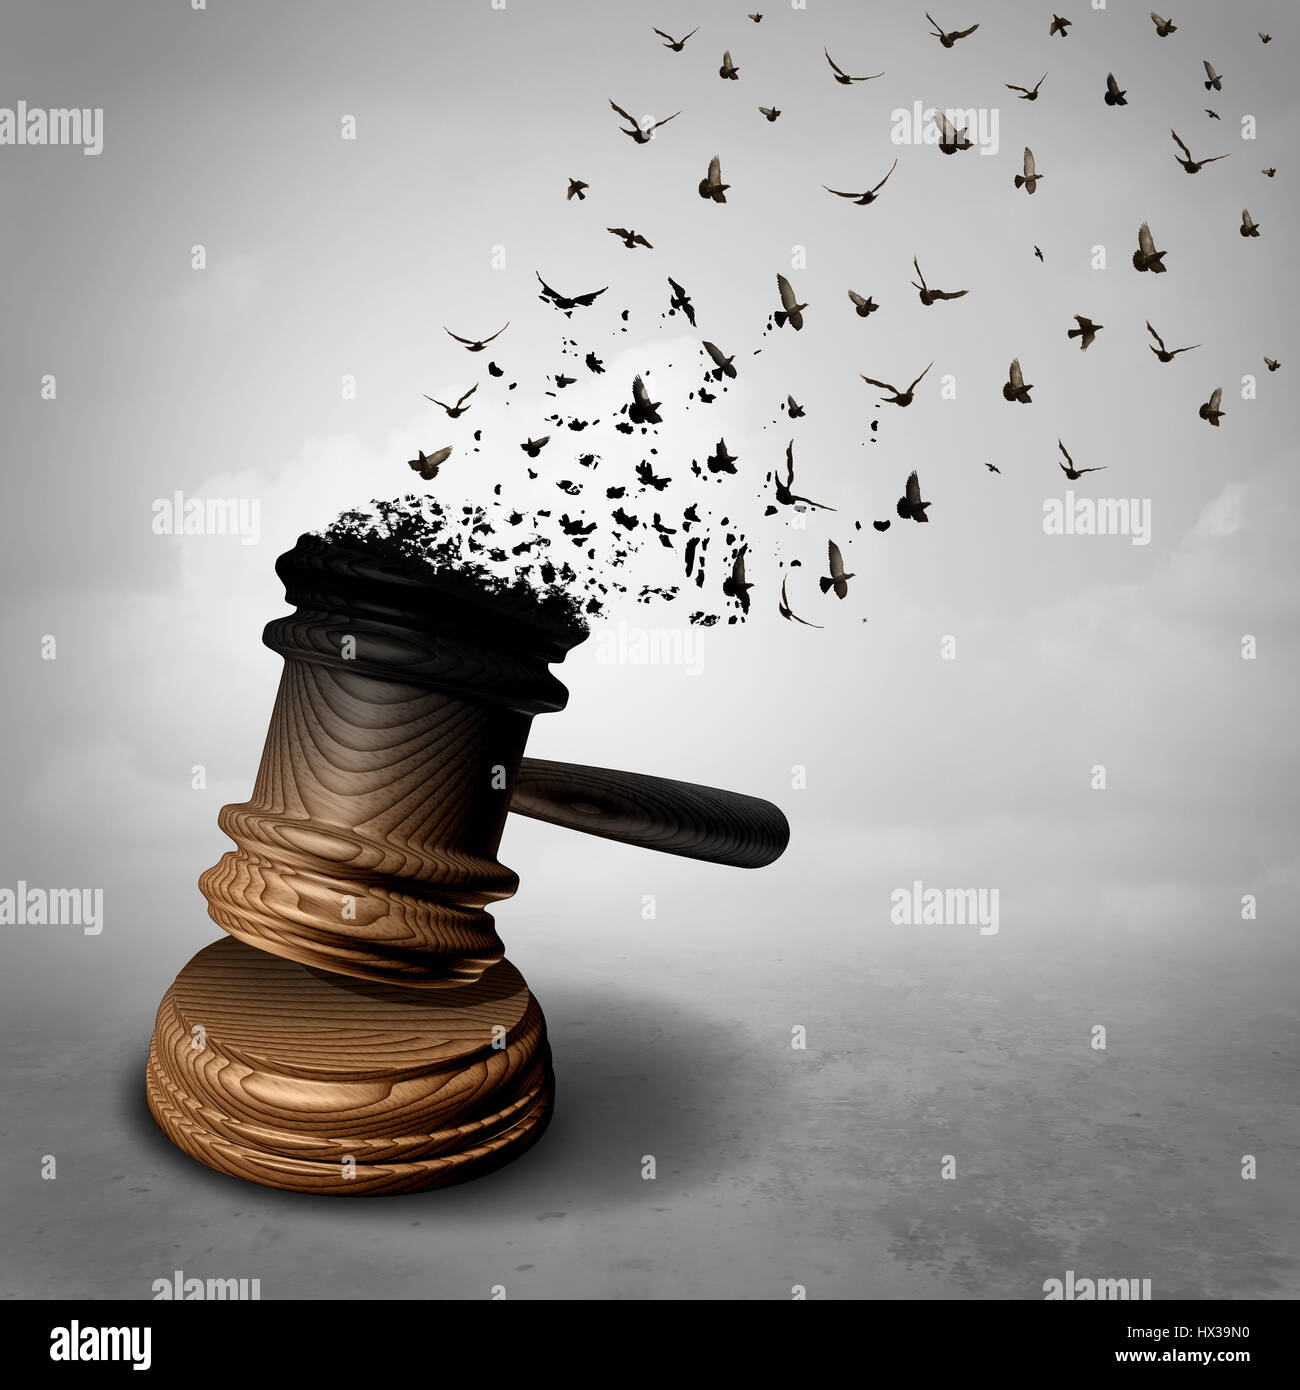 Amnesty concept and law decline or symbol for a legal pardon as a judge gavel or mallet being transformed into free flying birds. Stock Photo